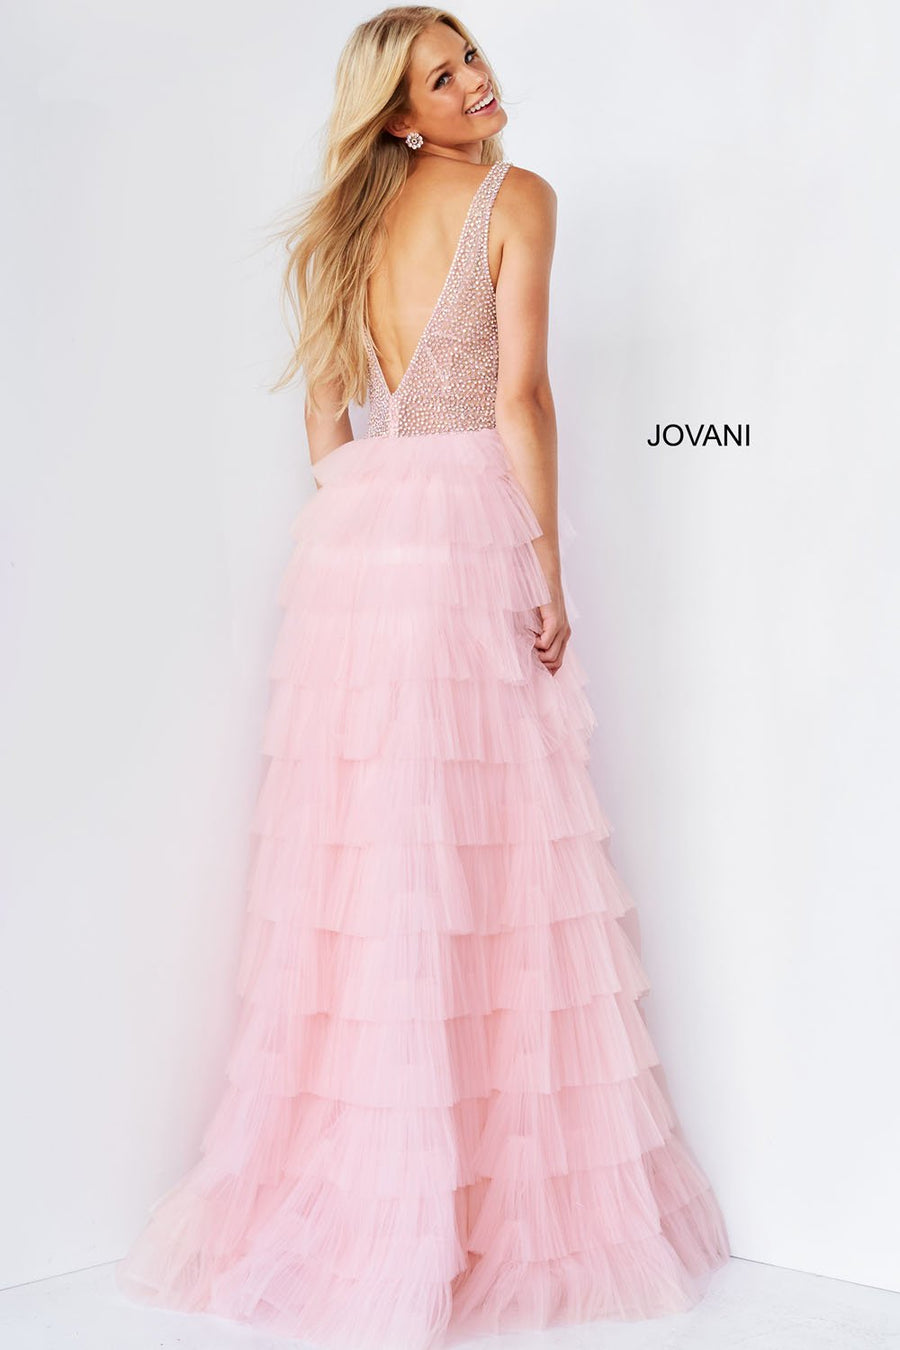 Jovani 07235 prom dress images.  Jovani style 07235 is available in these colors: Blush, Light Blue, Lilac, White.